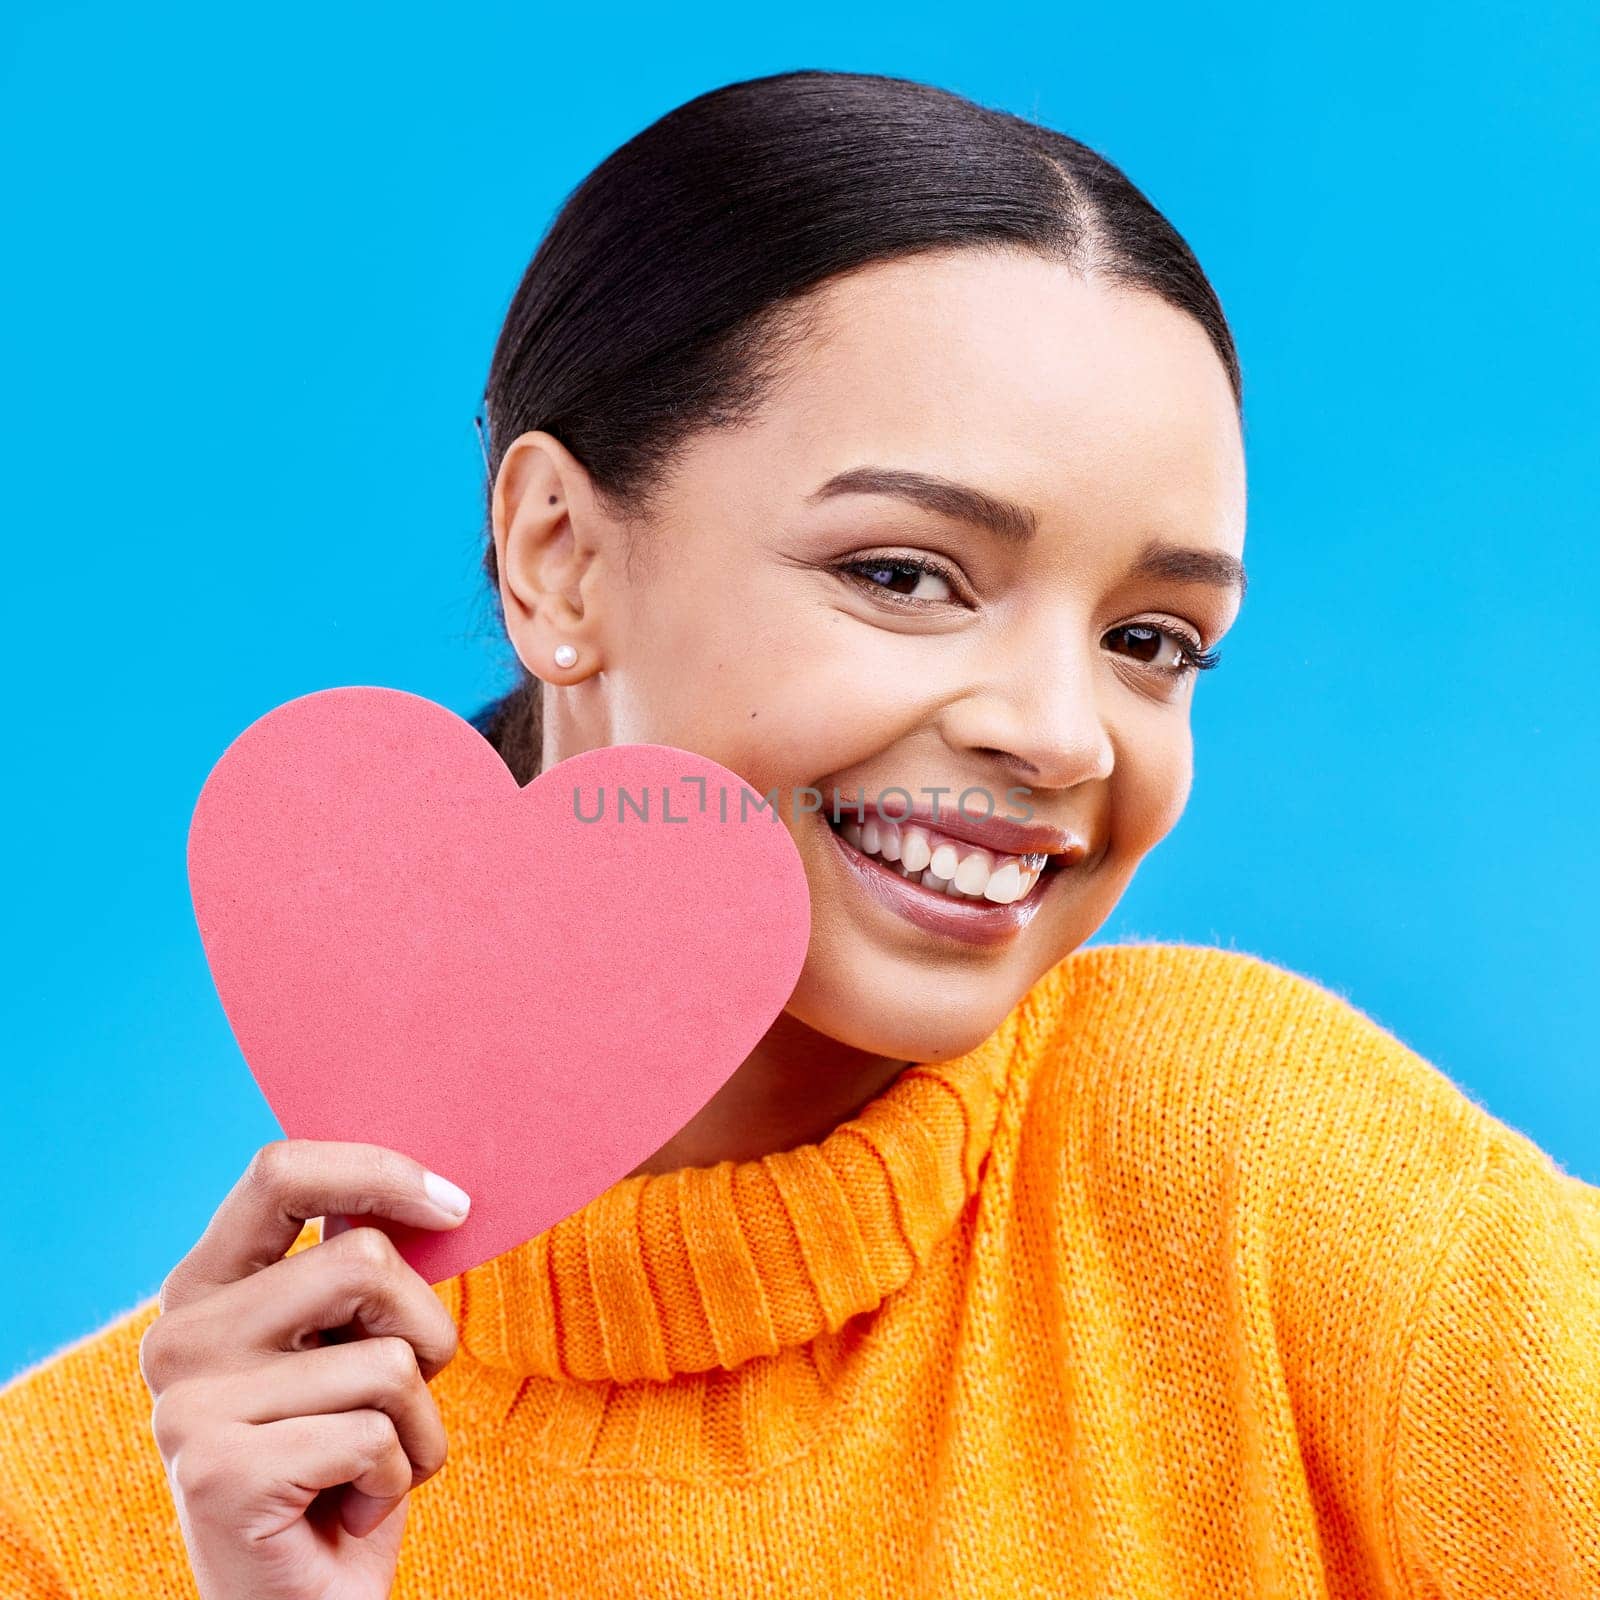 Paper heart, love and portrait of happy woman in studio, blue background and romantic sign. Female model, emoji shape and smile for care, support and thank you for kindness, valentines day or emotion.